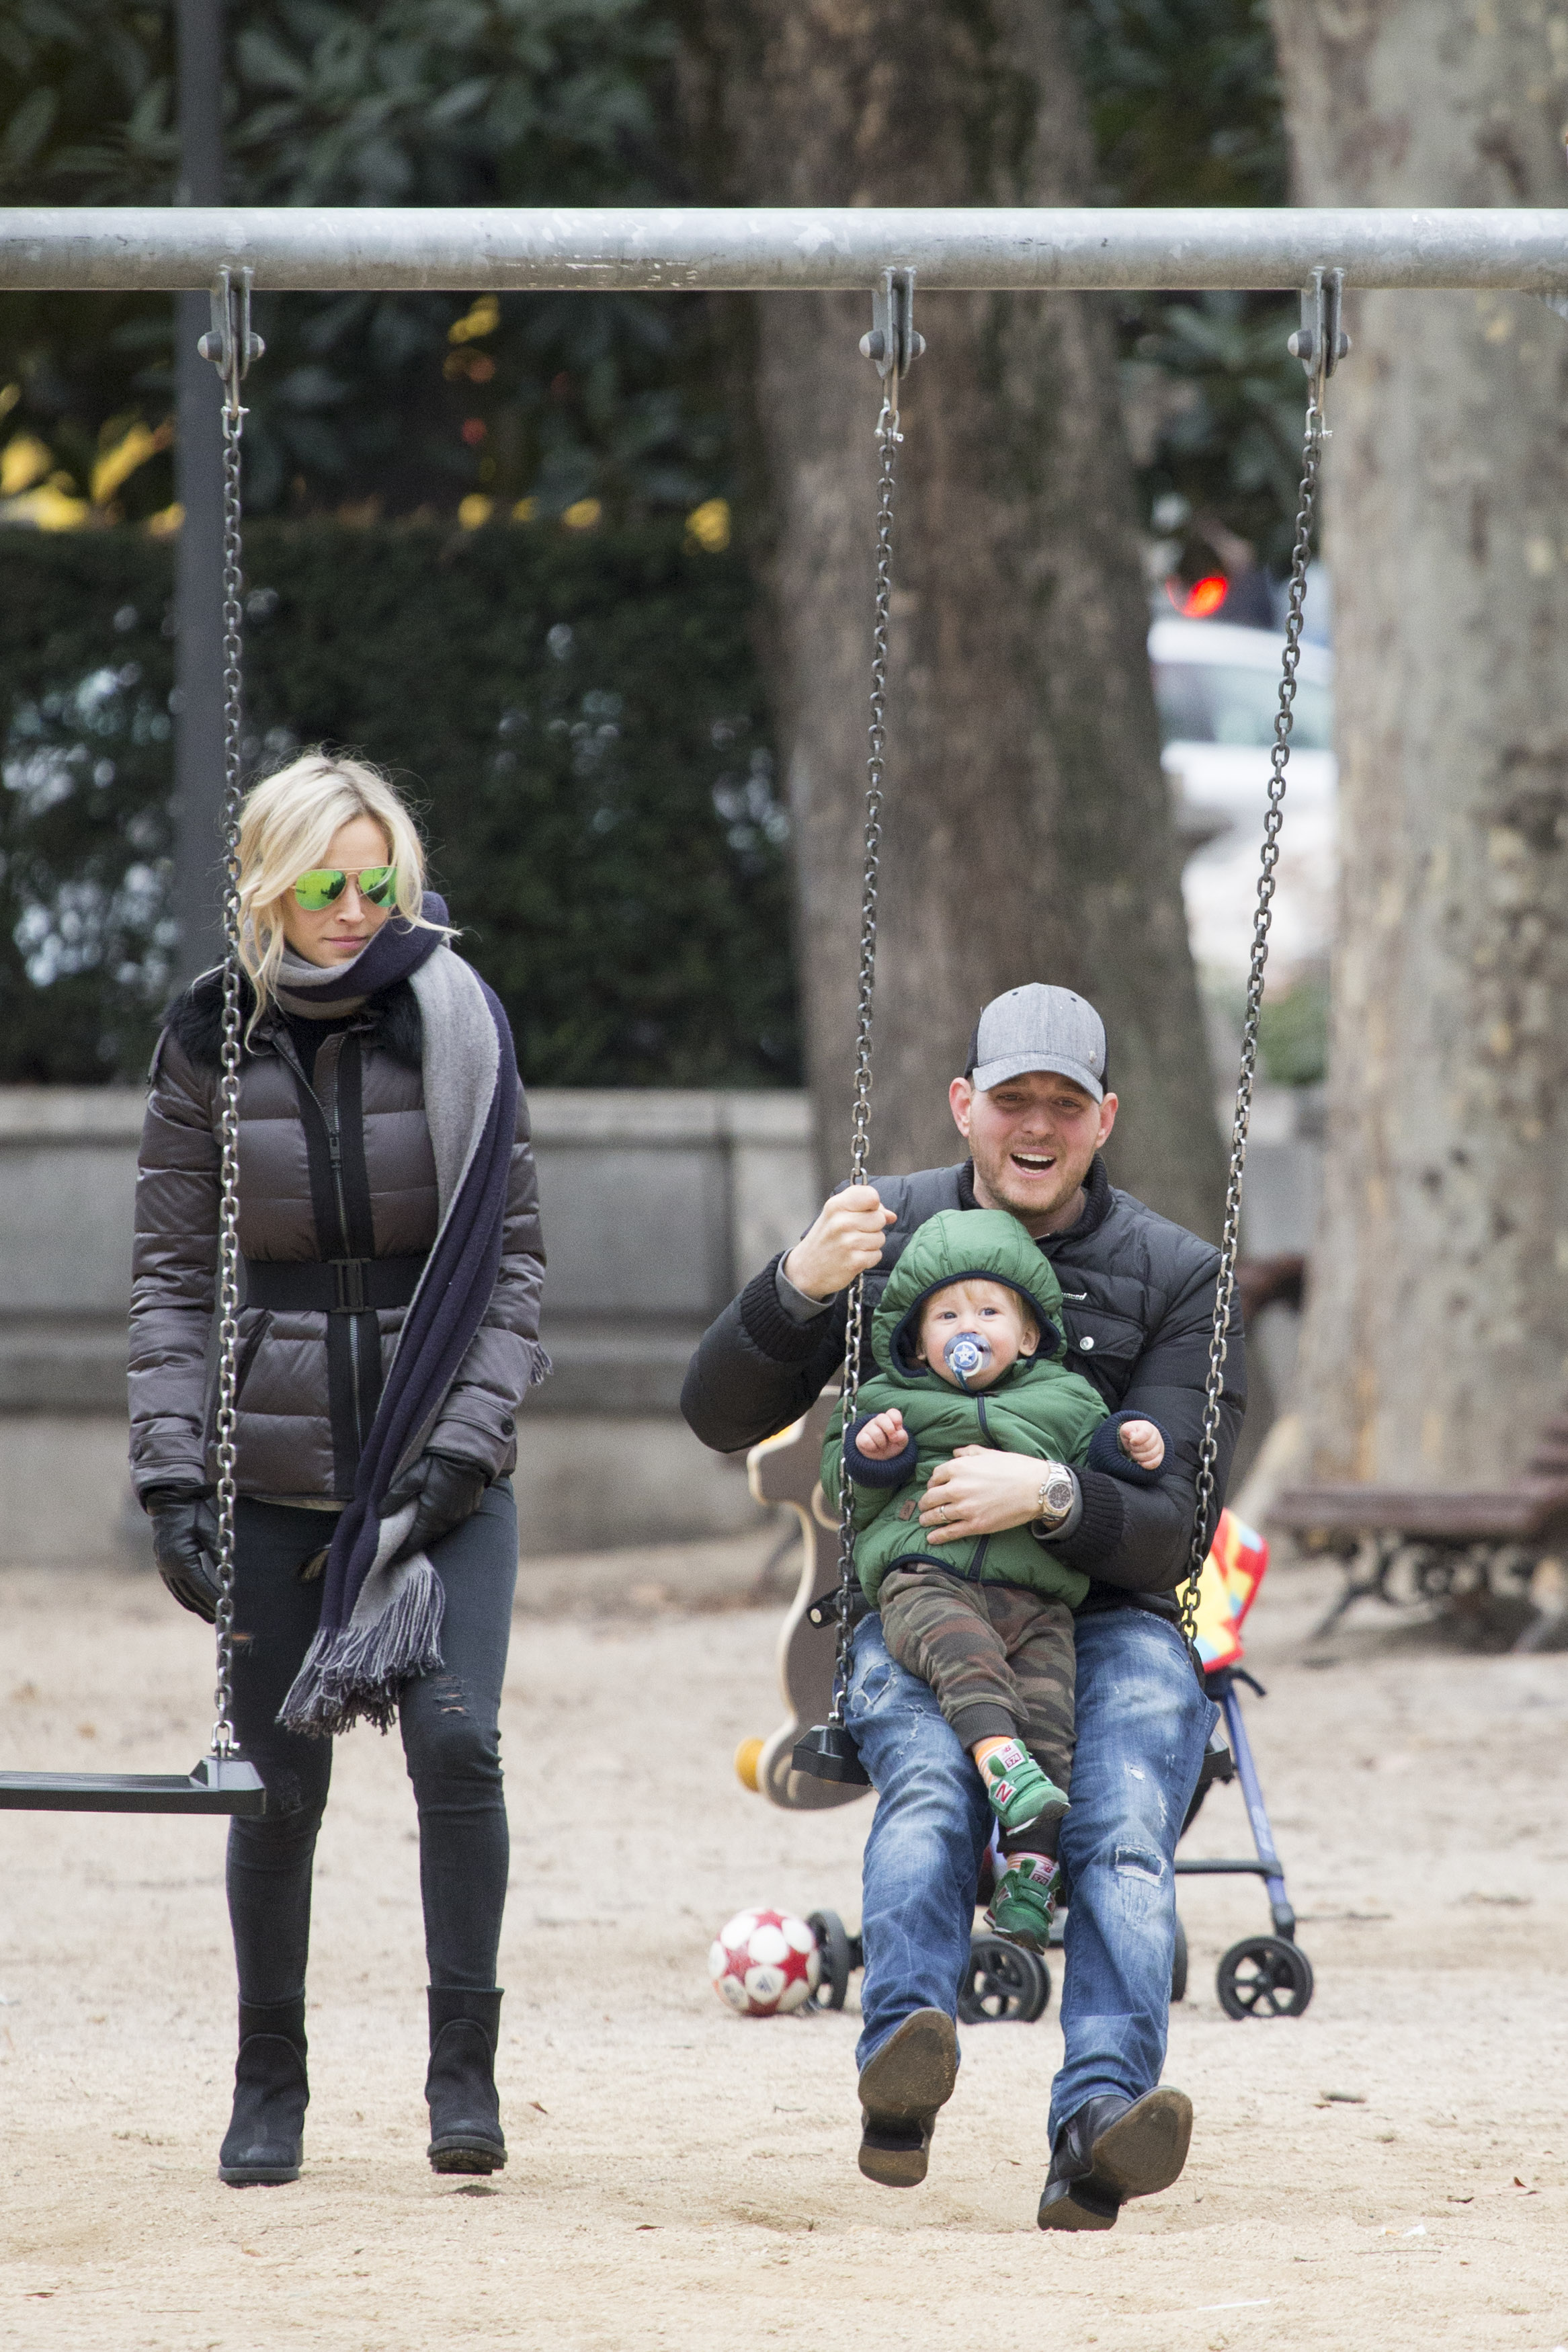 Luisana Lopilato, Noah, and Michael Bublé spotted in Madrid, Spain on February 12, 2015 | Source: Getty Images